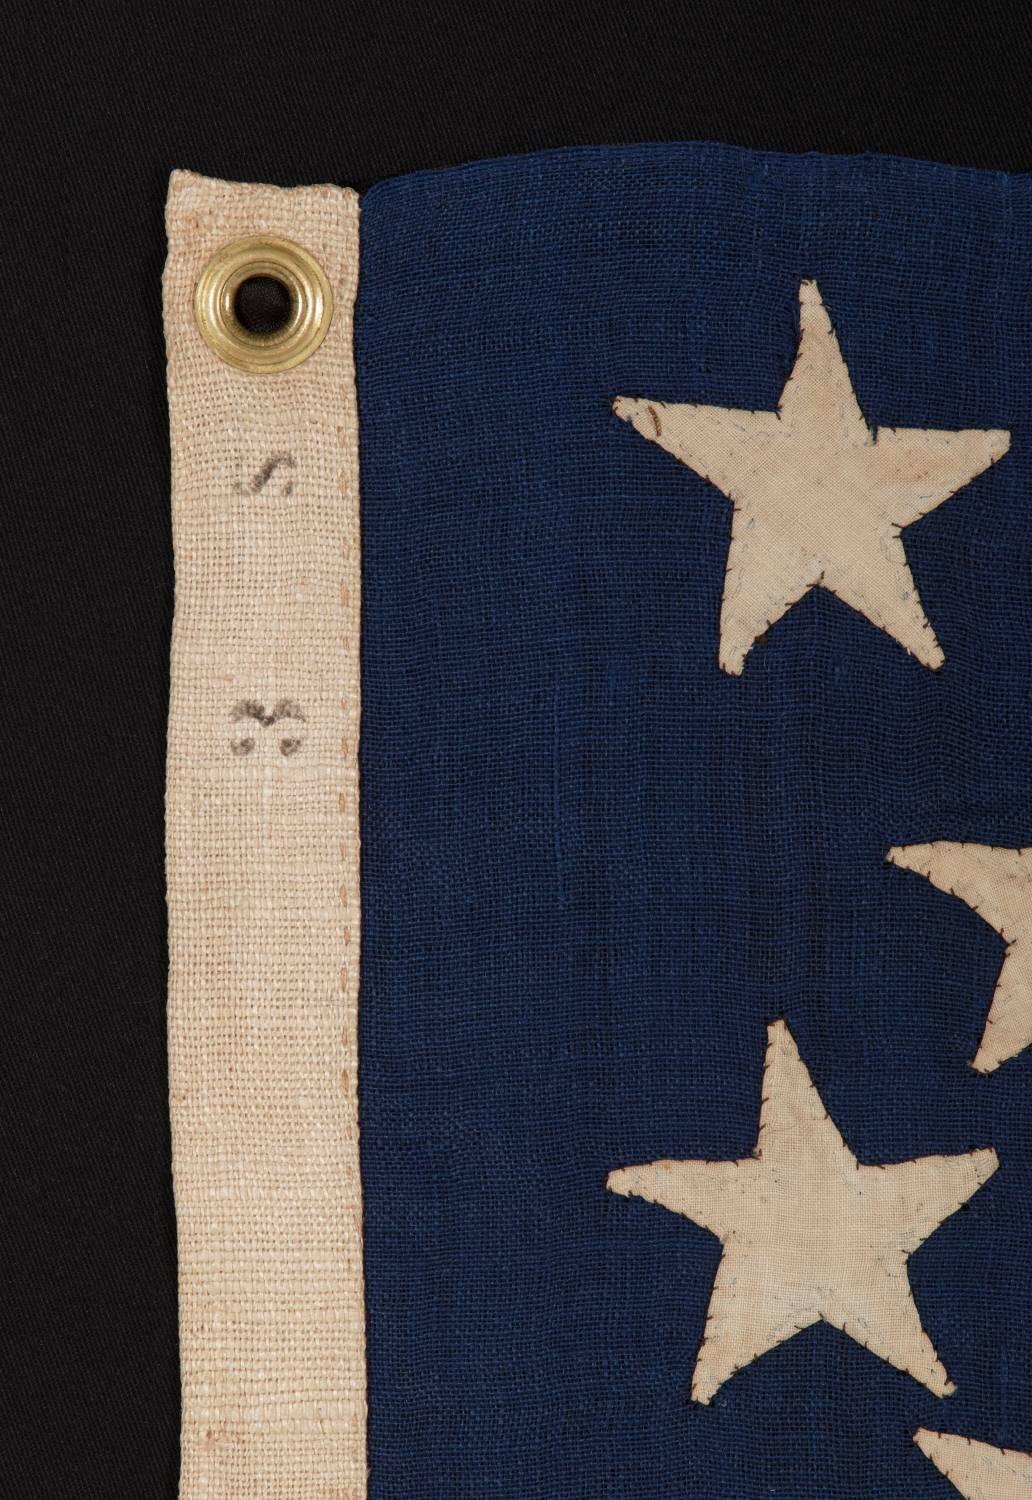 19th Century Entirely Hand-Sewn Antique American Flag of the 1861-1876 Era with 13 Stars